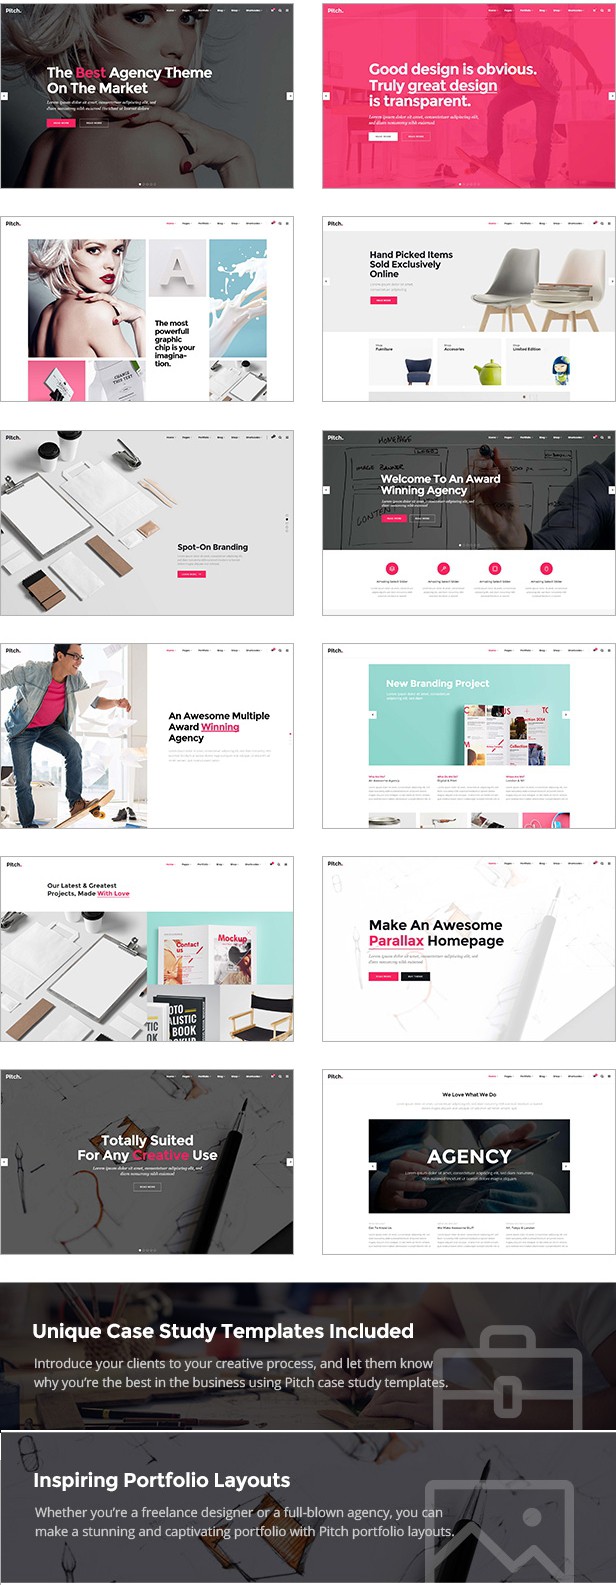 WordPress theme for Freelancers and Agencies